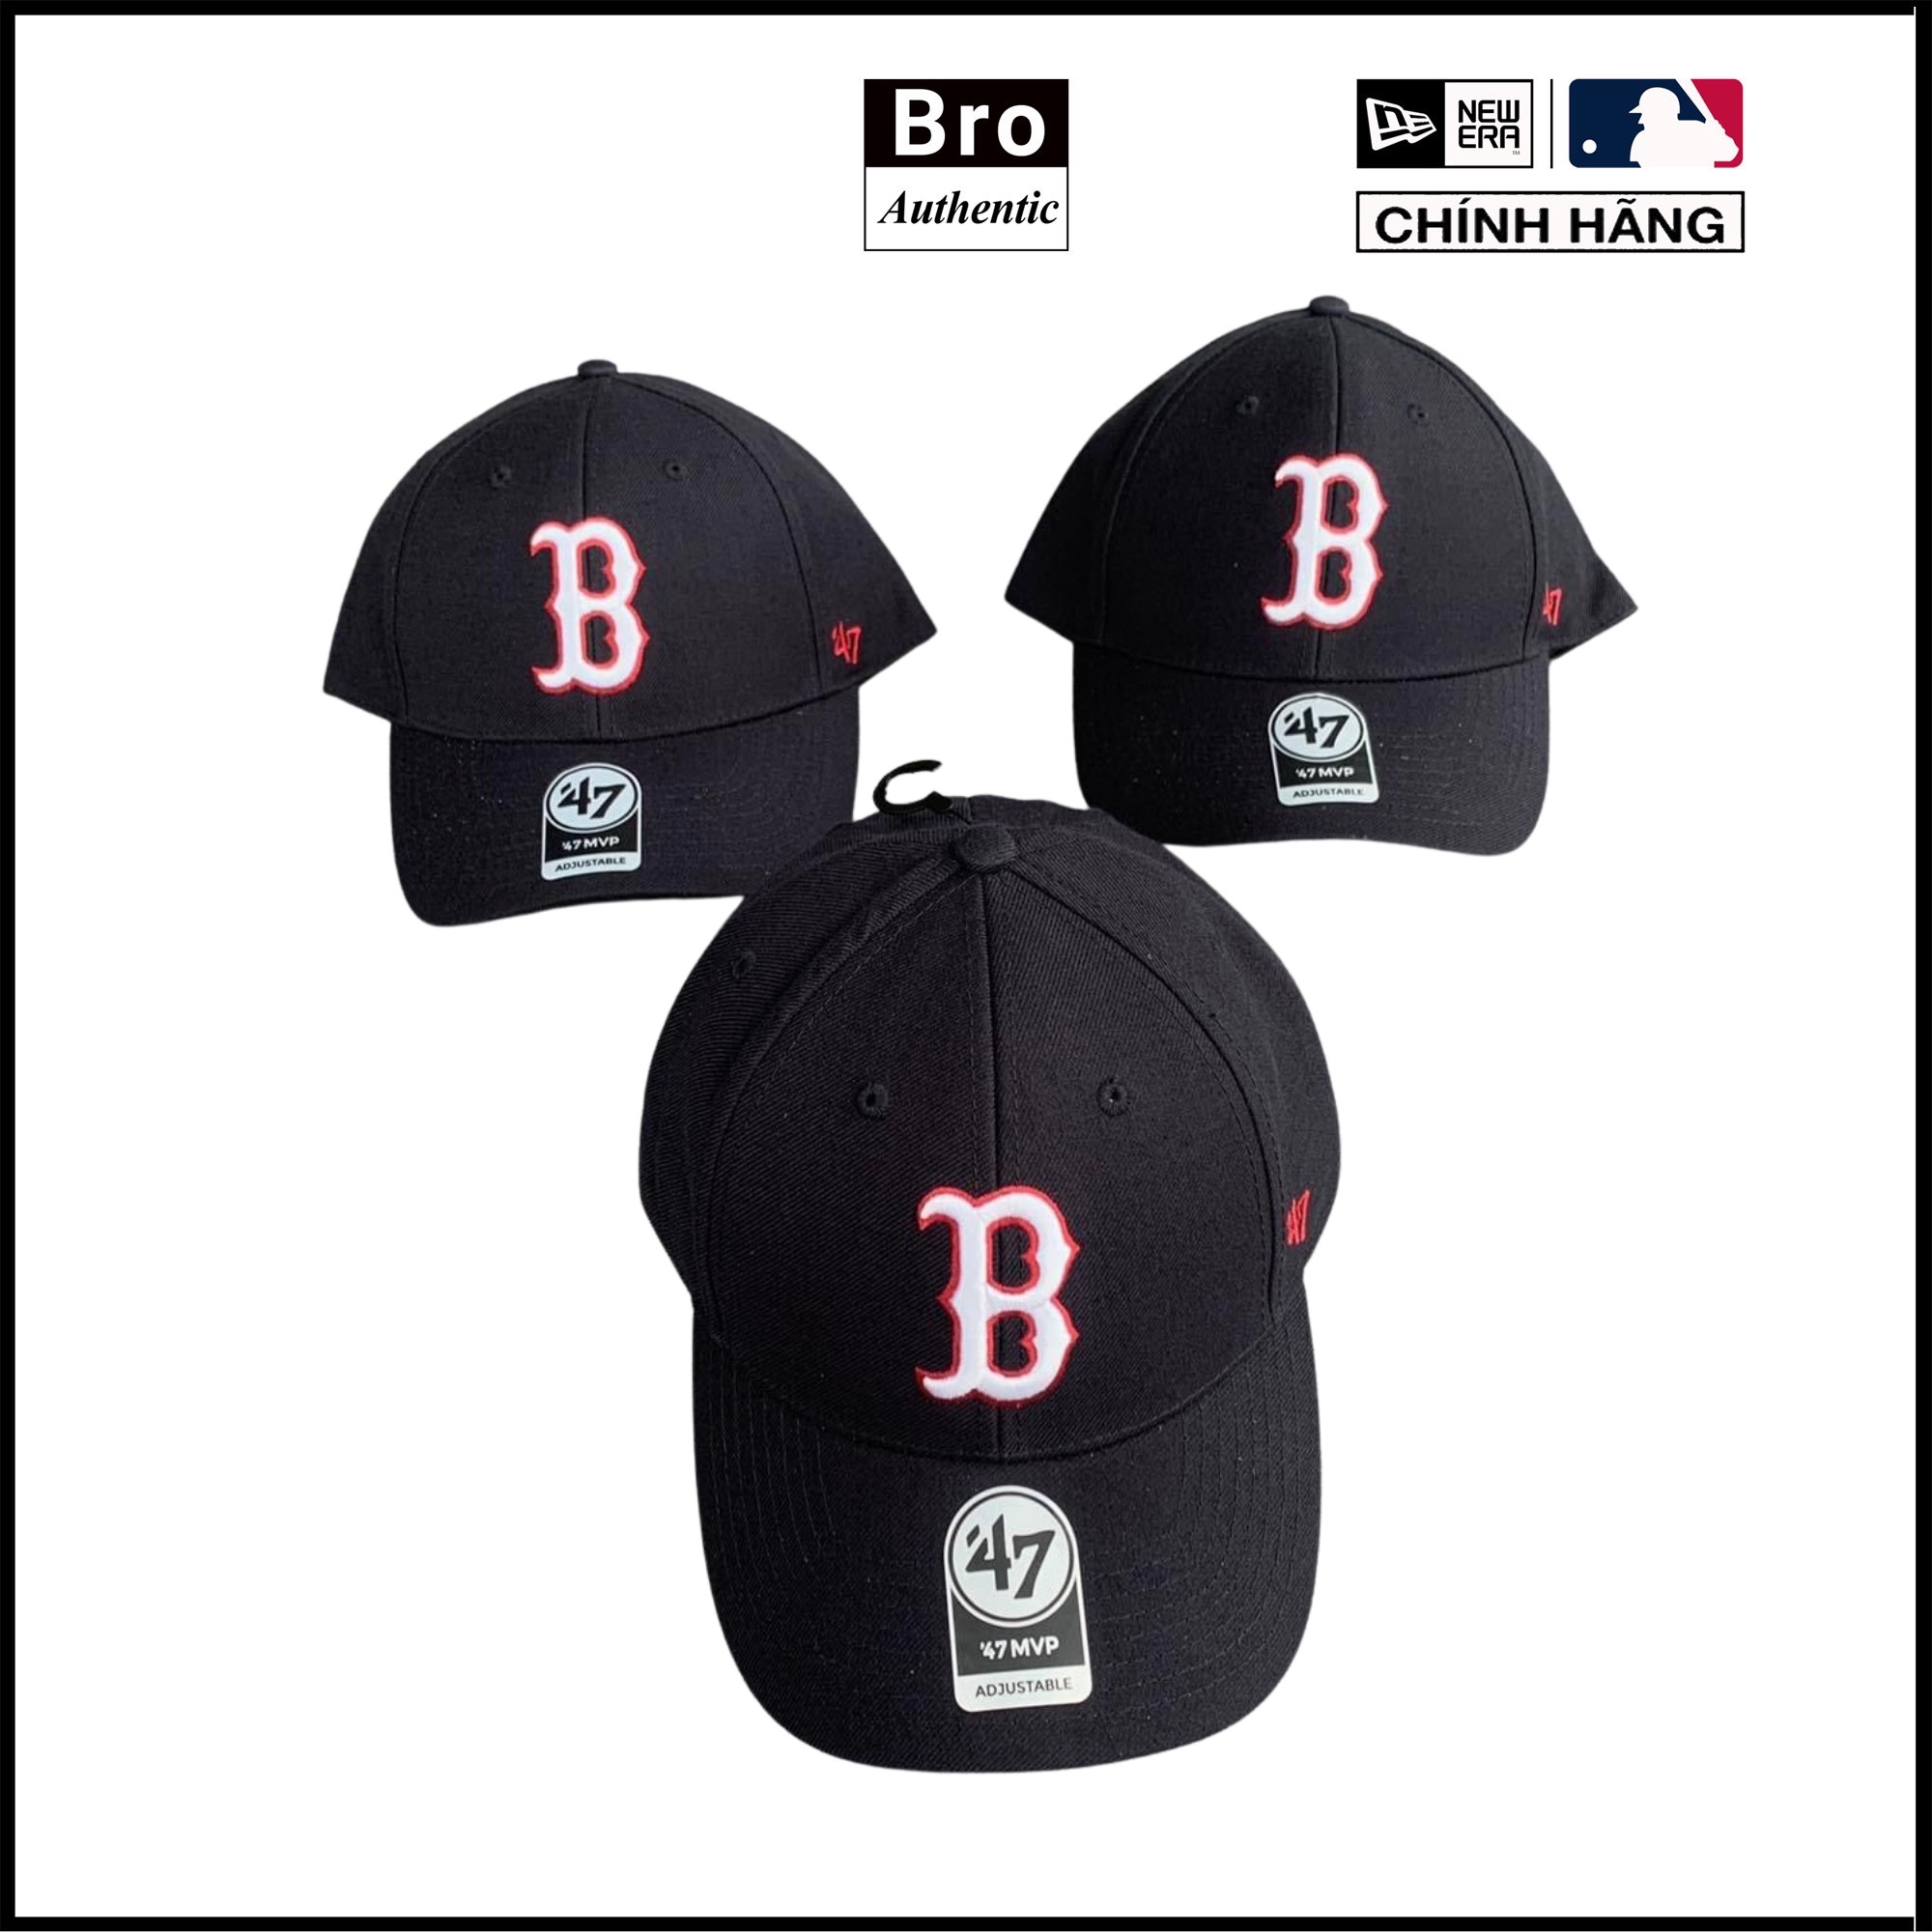 Amazoncom  BOSTON RED SOX 47 CLEAN UP OSF  Sports  Outdoors